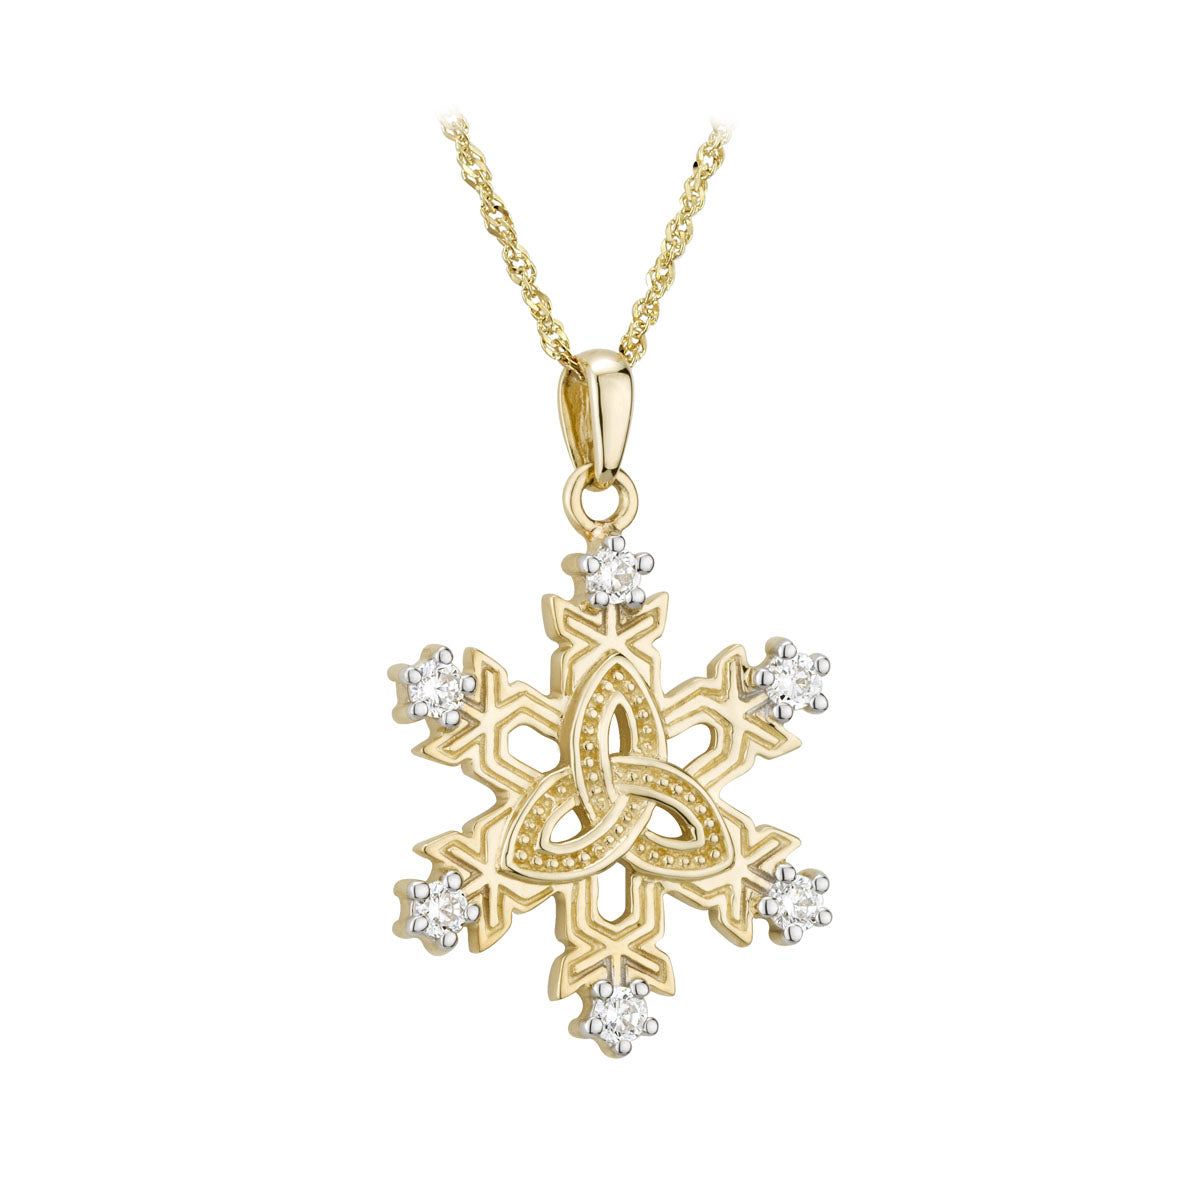 10 karat gold cubic zirconia celtic snowflake necklace from Solvar comes on 18 inch 10 karat gold rolo chain